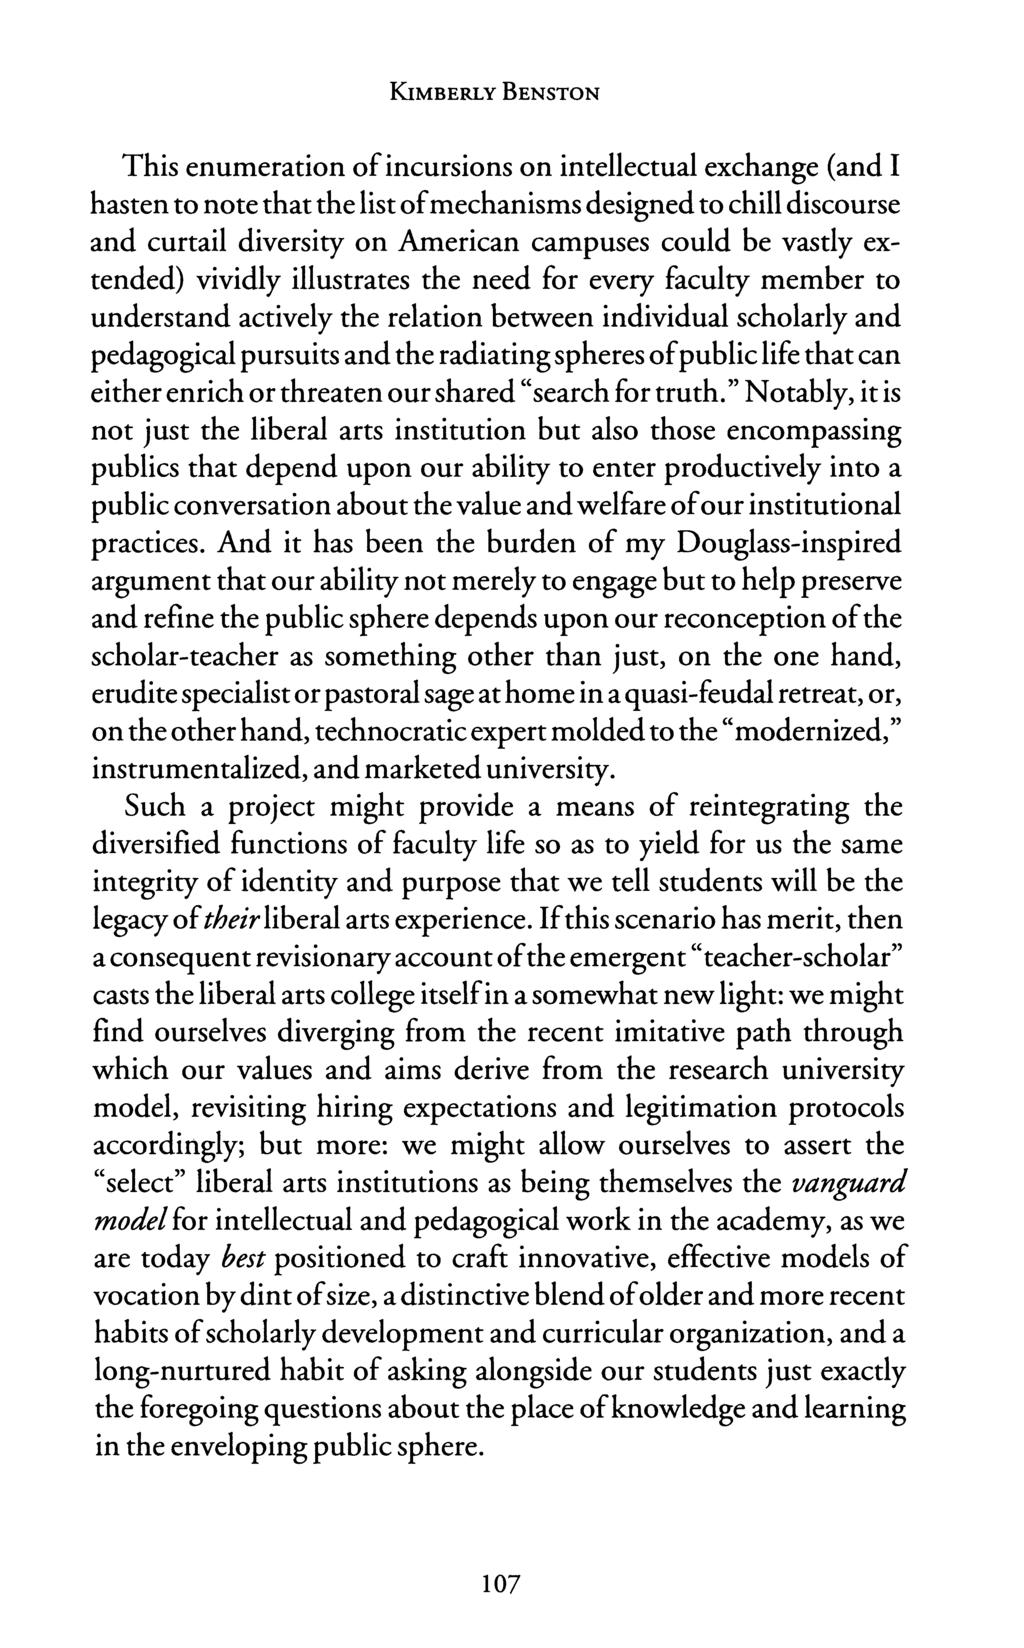 KIMBERLY BENSTON This enumeration of incursions on intellectual exchange (and I hasten to note that the list of mechanisms designed to chill discourse and curtail diversity on American campuses could